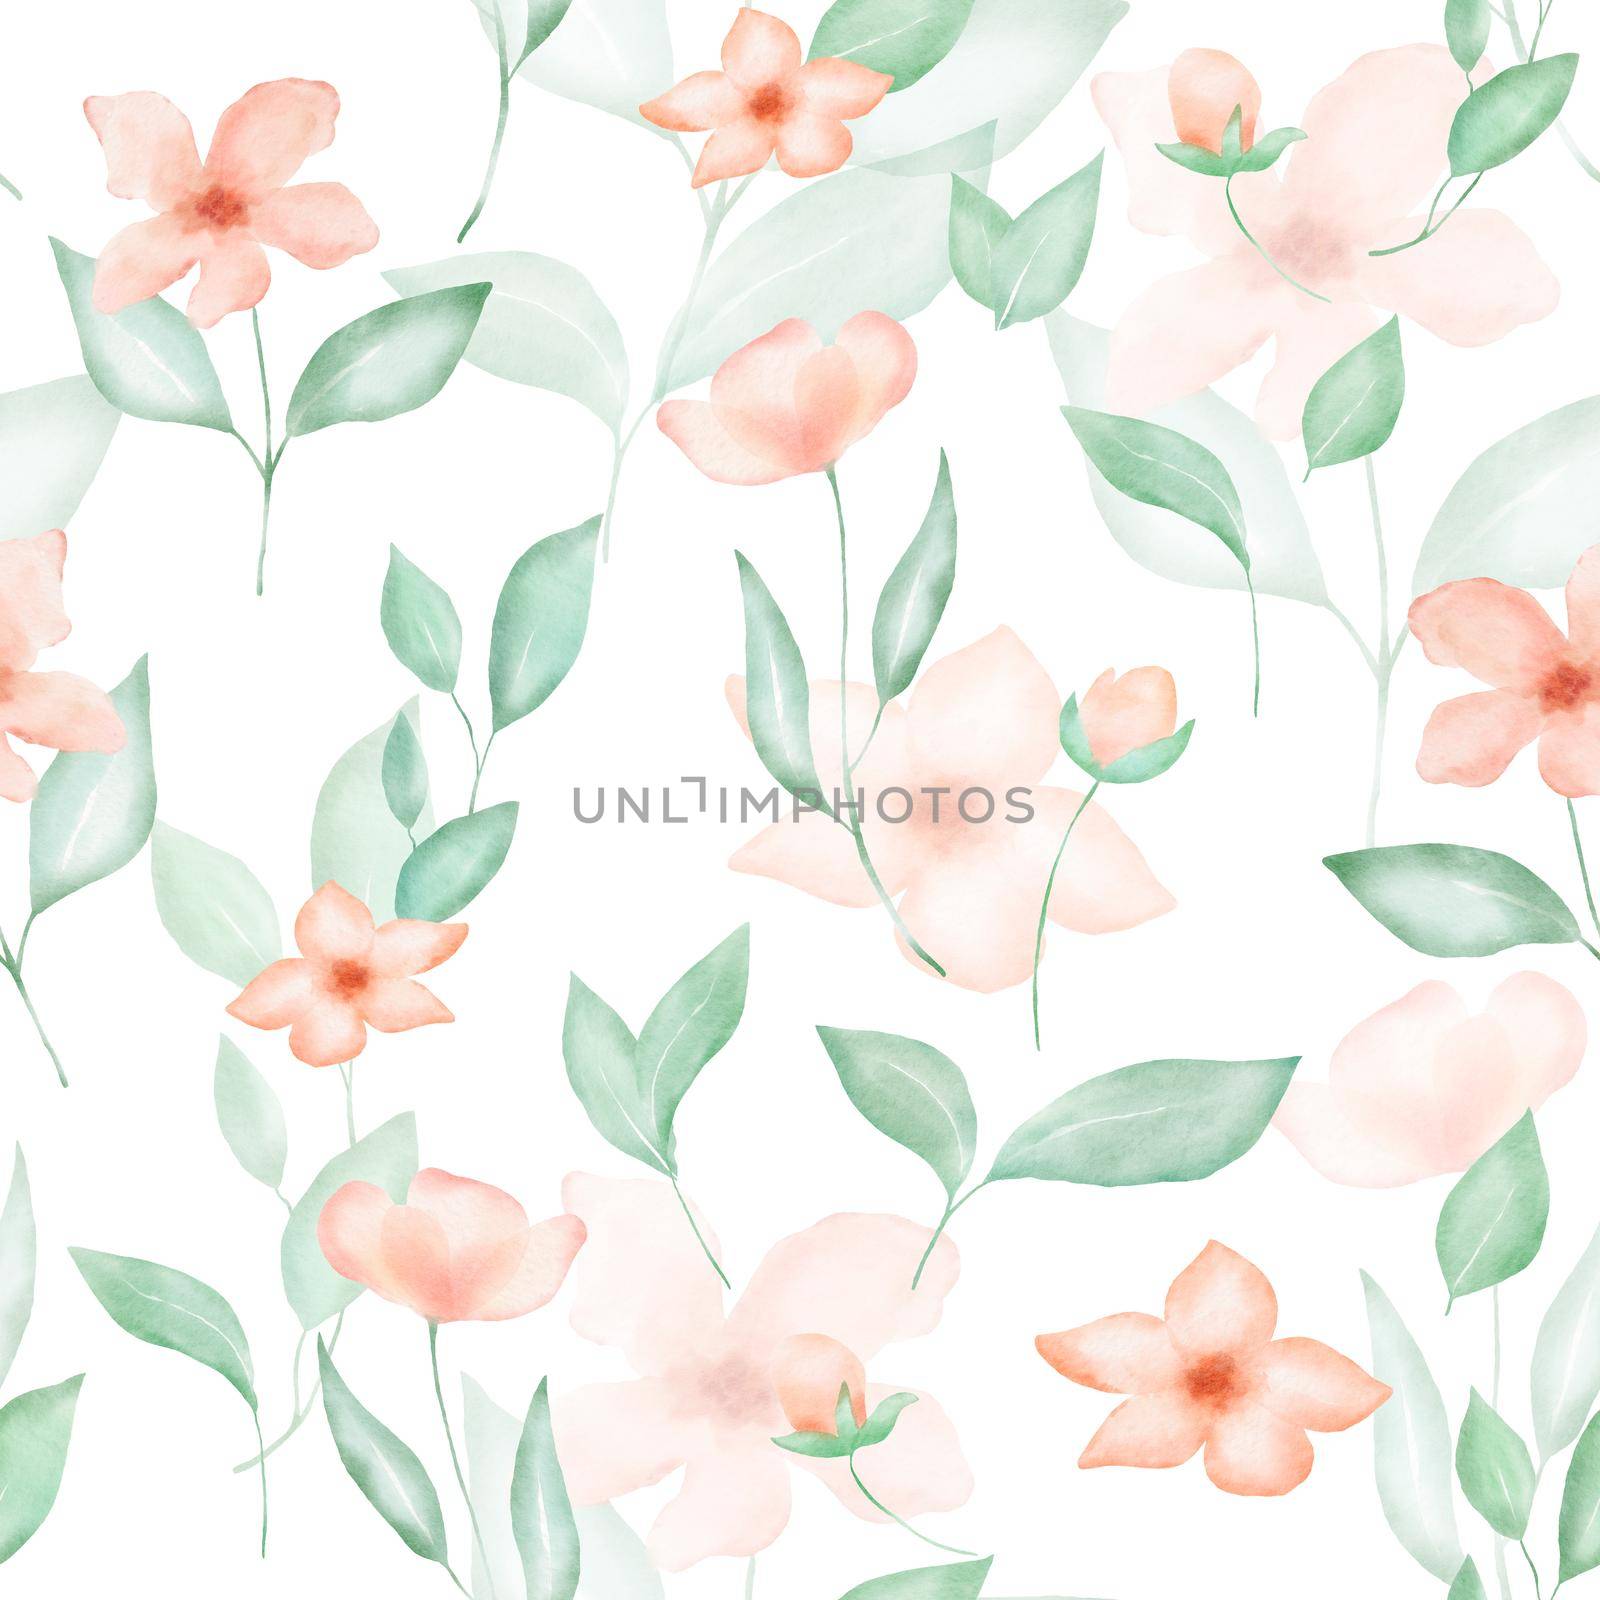 Watercolor floral seamless pattern with pink flowers and leaves. Spring colorful decor with hand drawn illustrations on white background